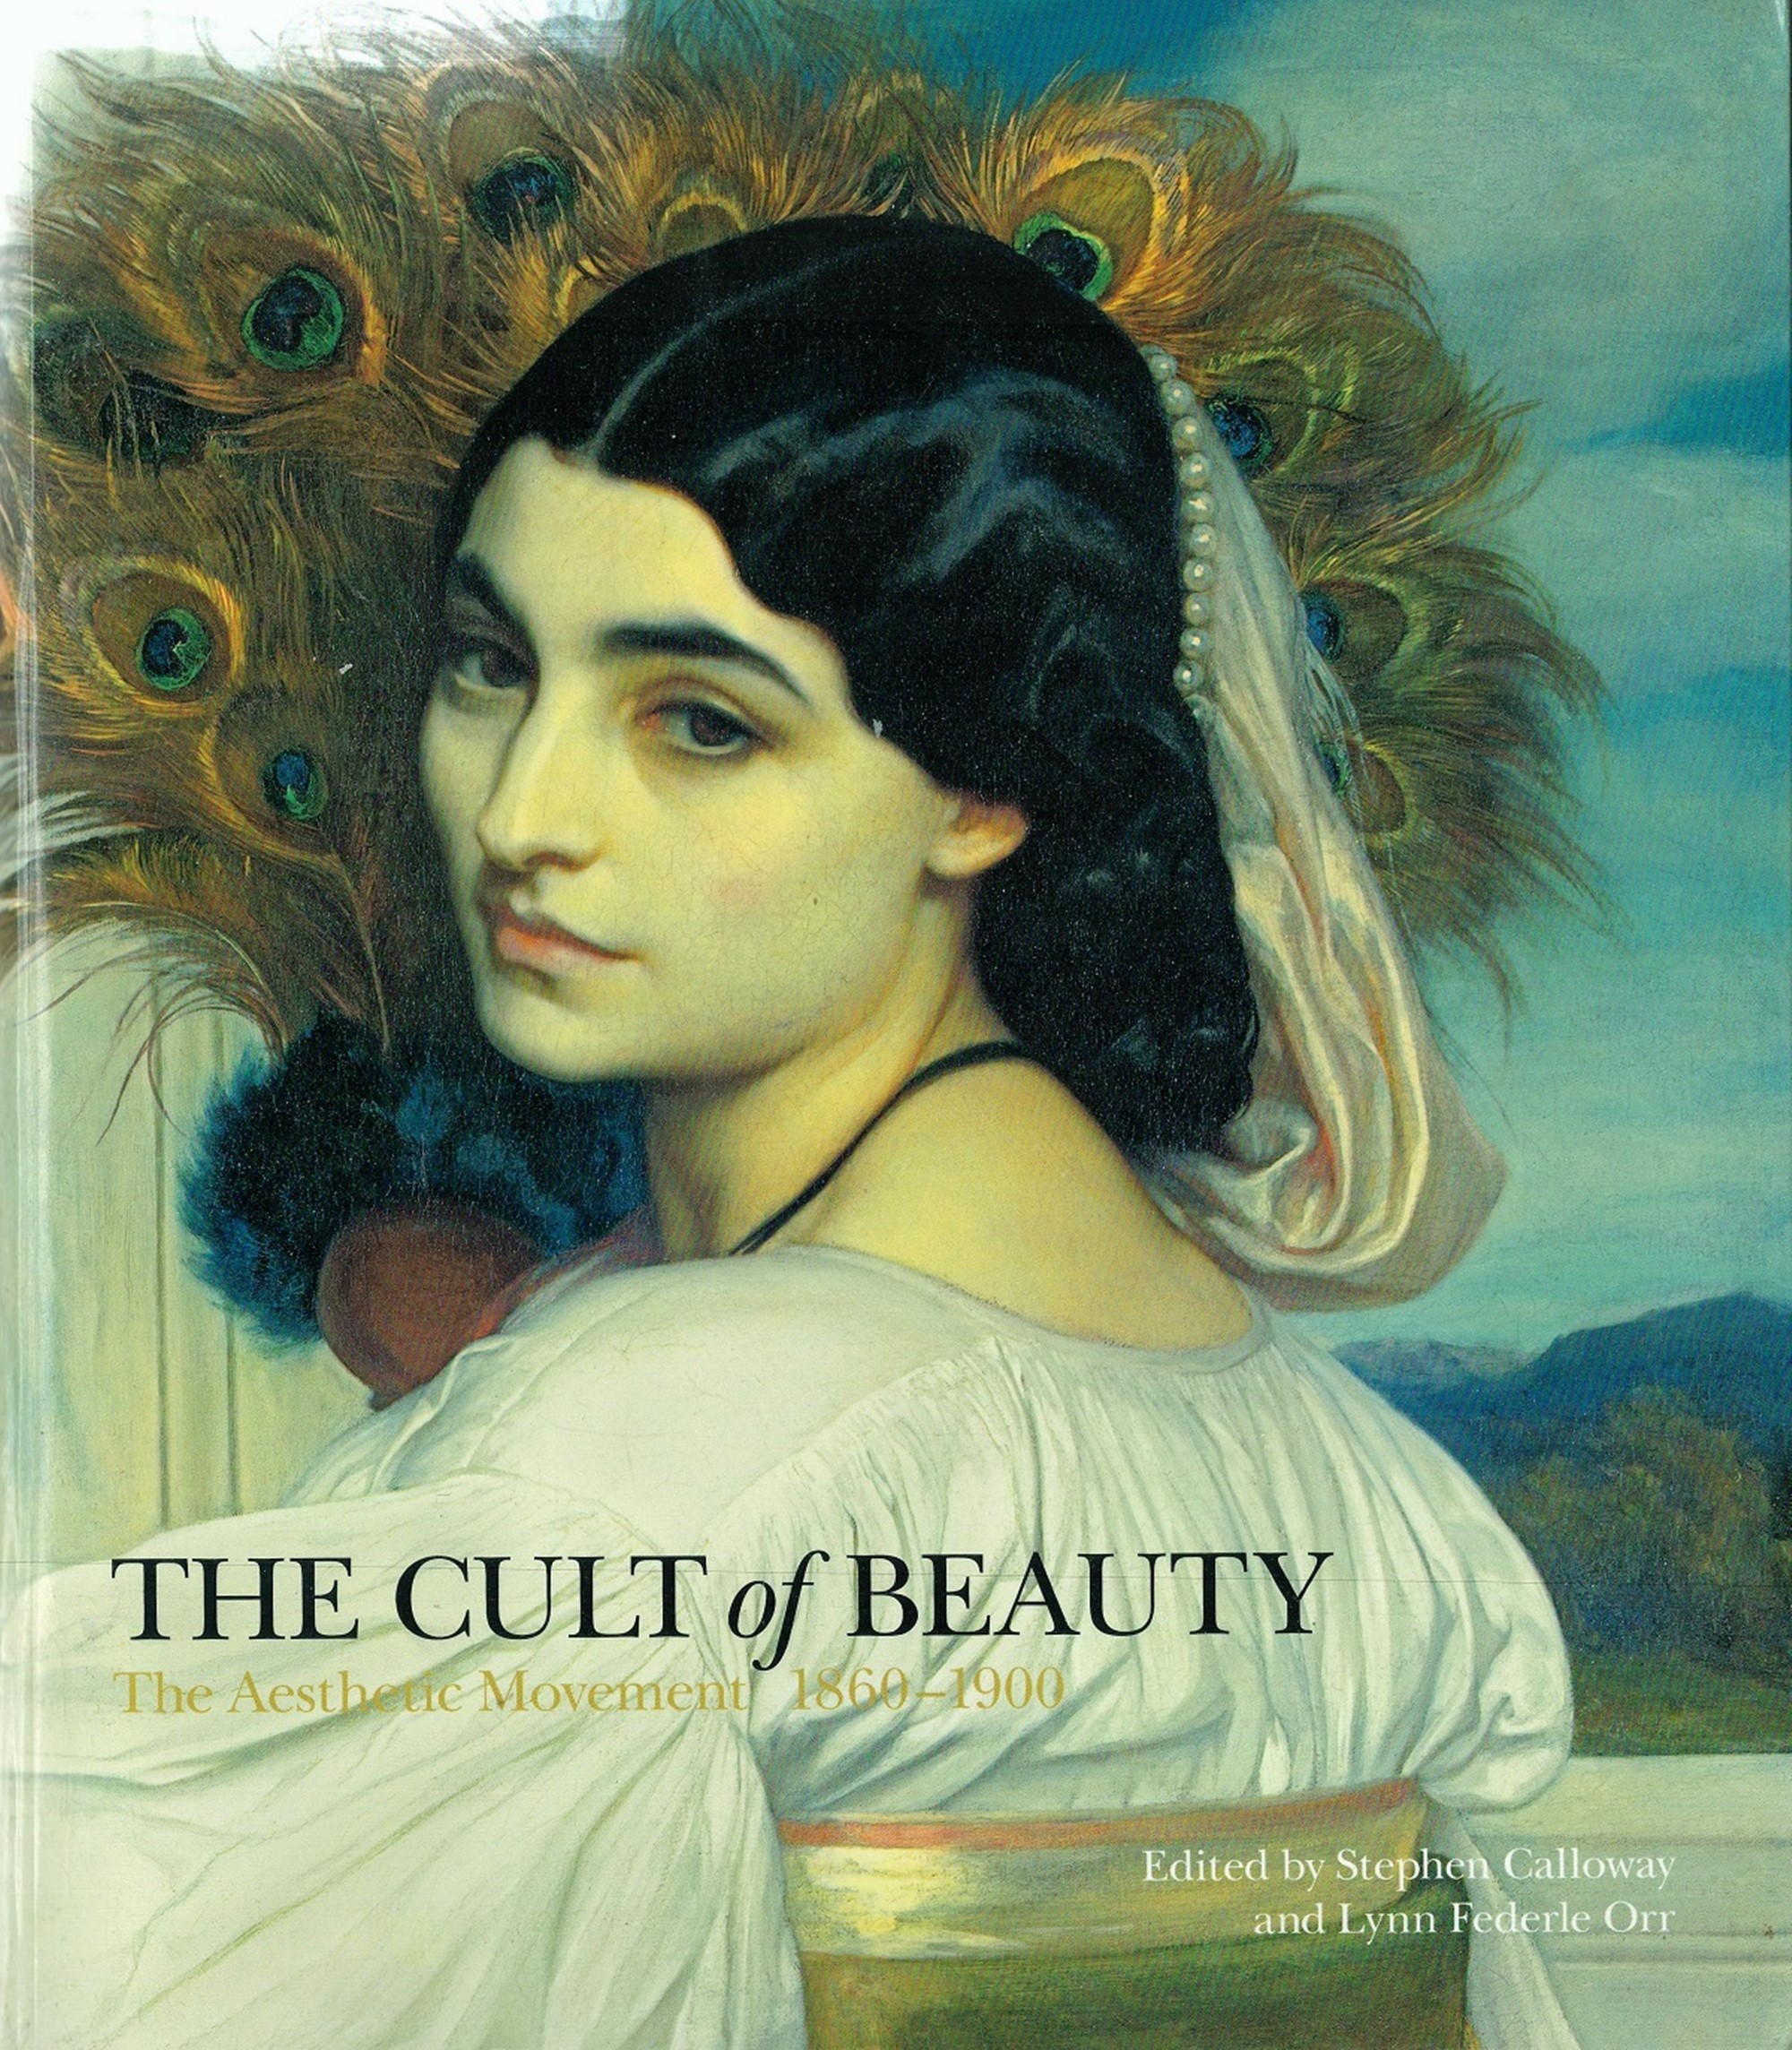 Signed Book Stephen Calloway The Cult of Beauty Softback Book 2011 First Edition Signed by Stephen - Image 2 of 6